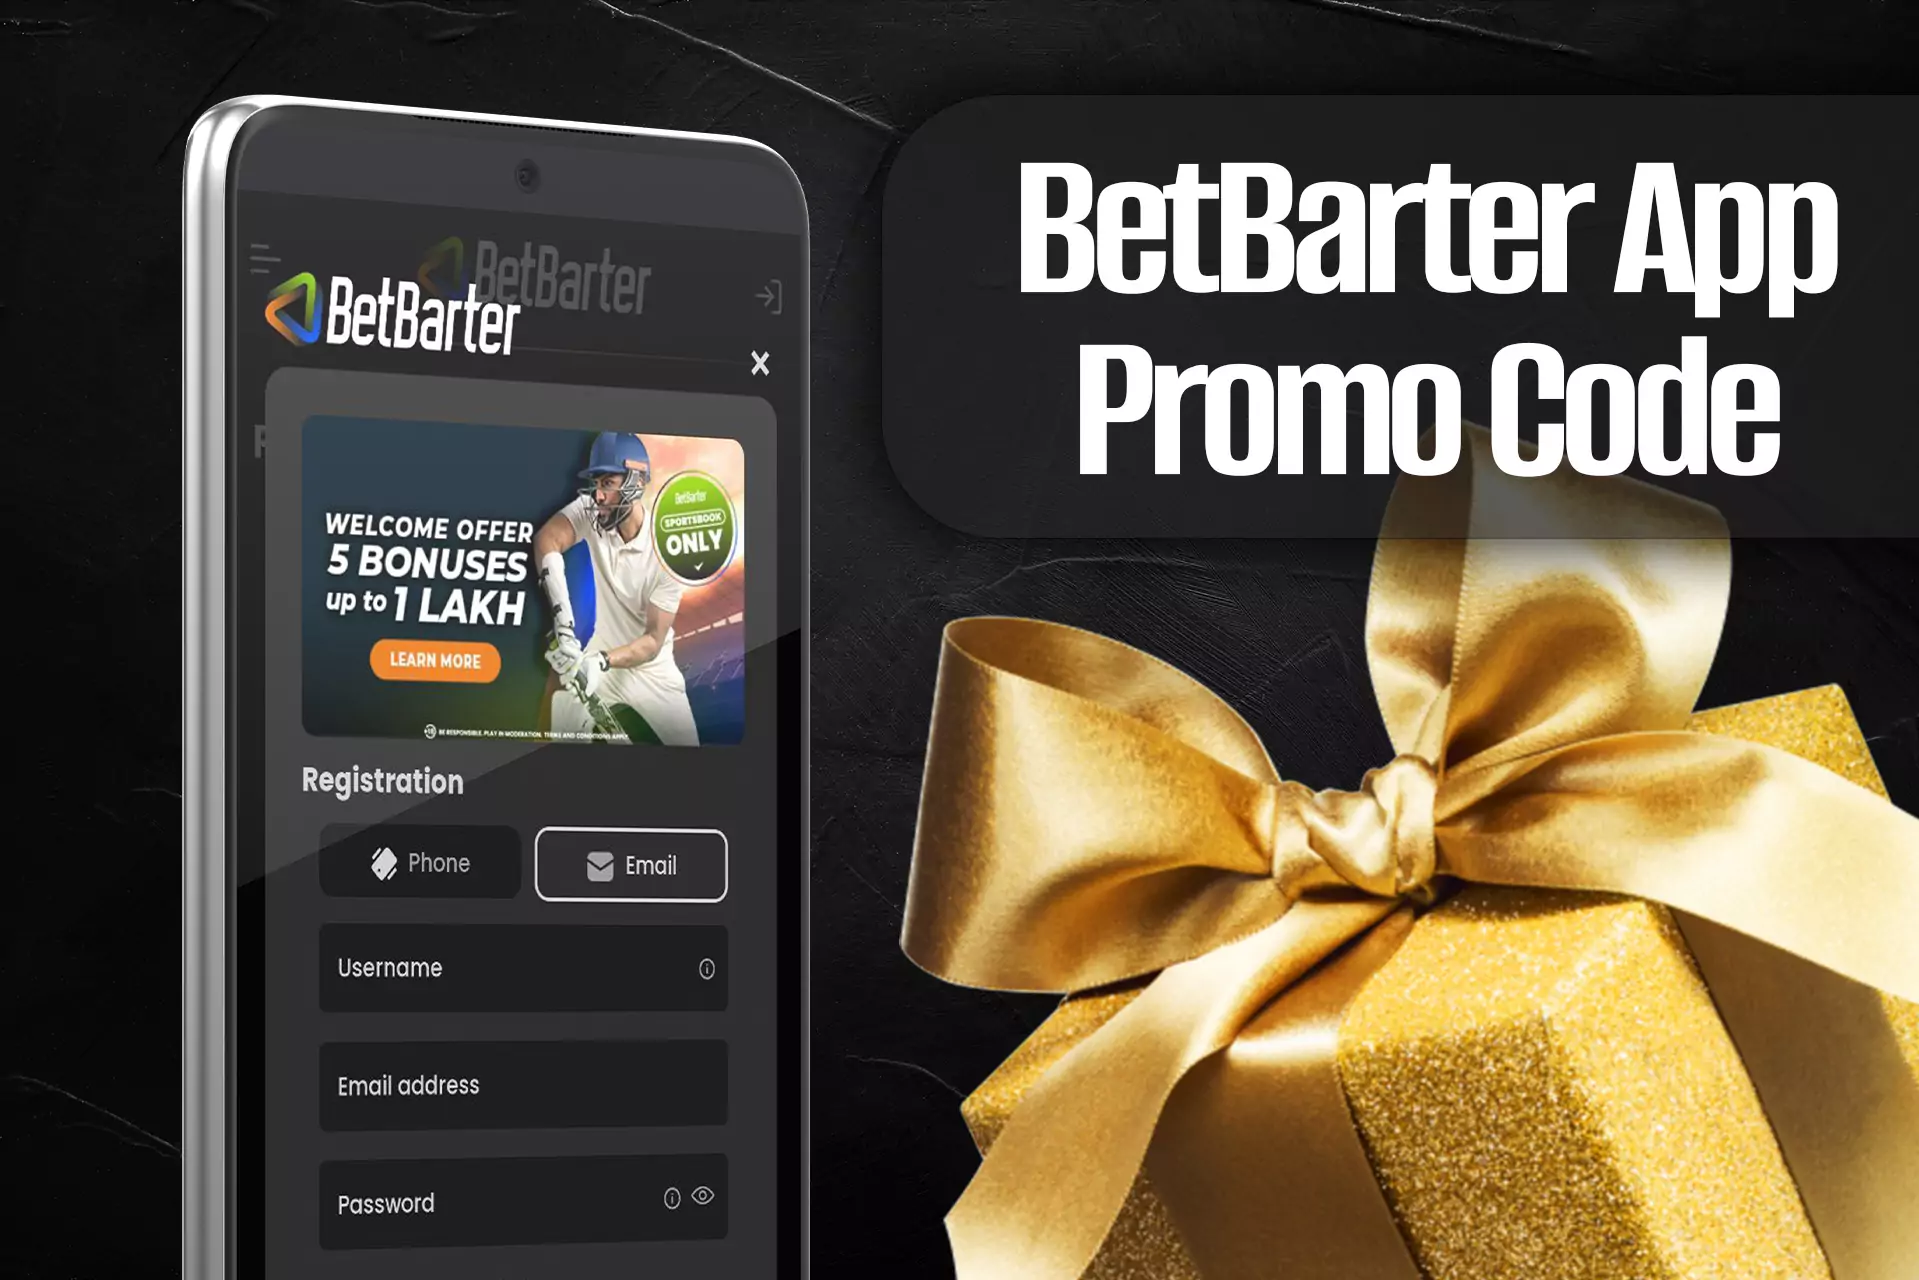 There are promo codes available in the Betbarter app.